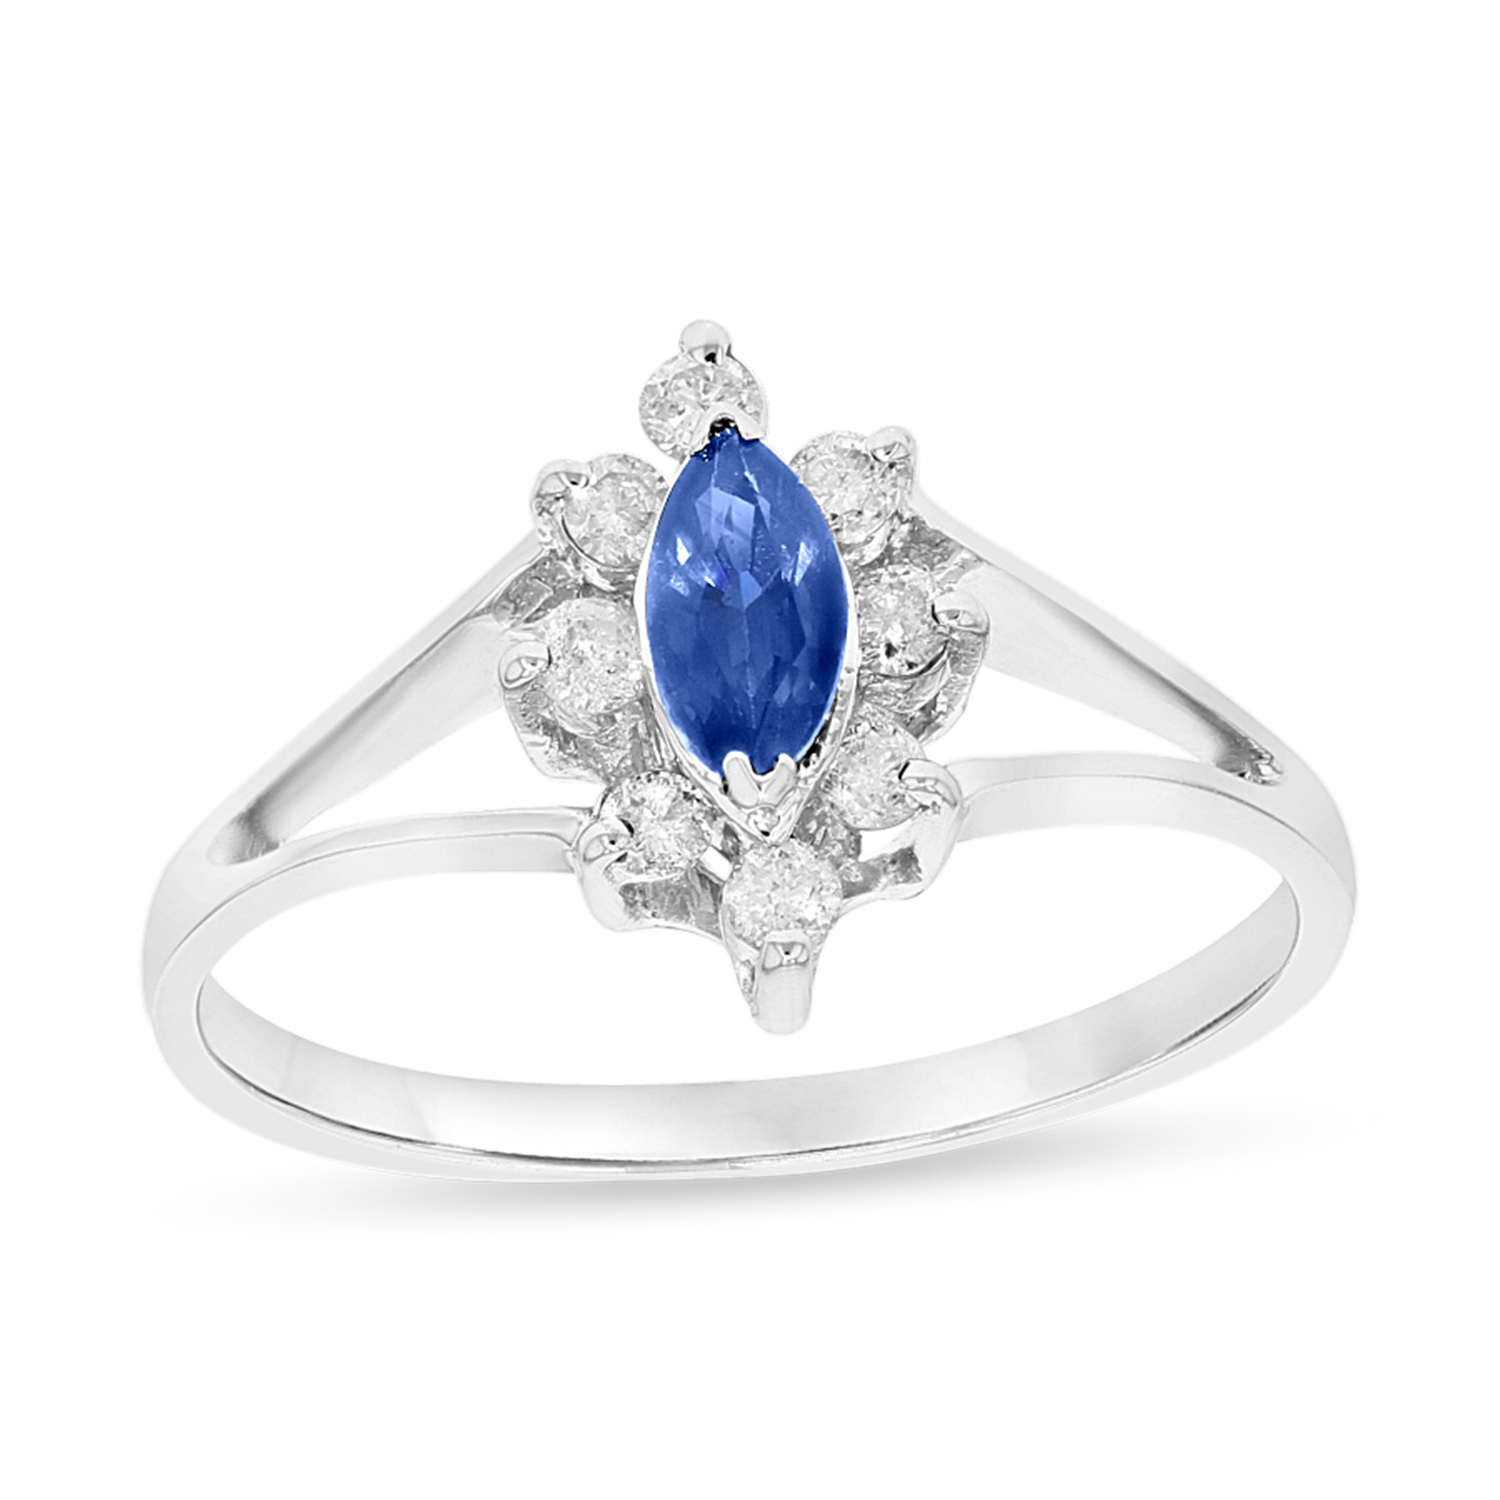 View 0.40ctw Diamond and Sapphire Marquis Ring in 14k White Gold